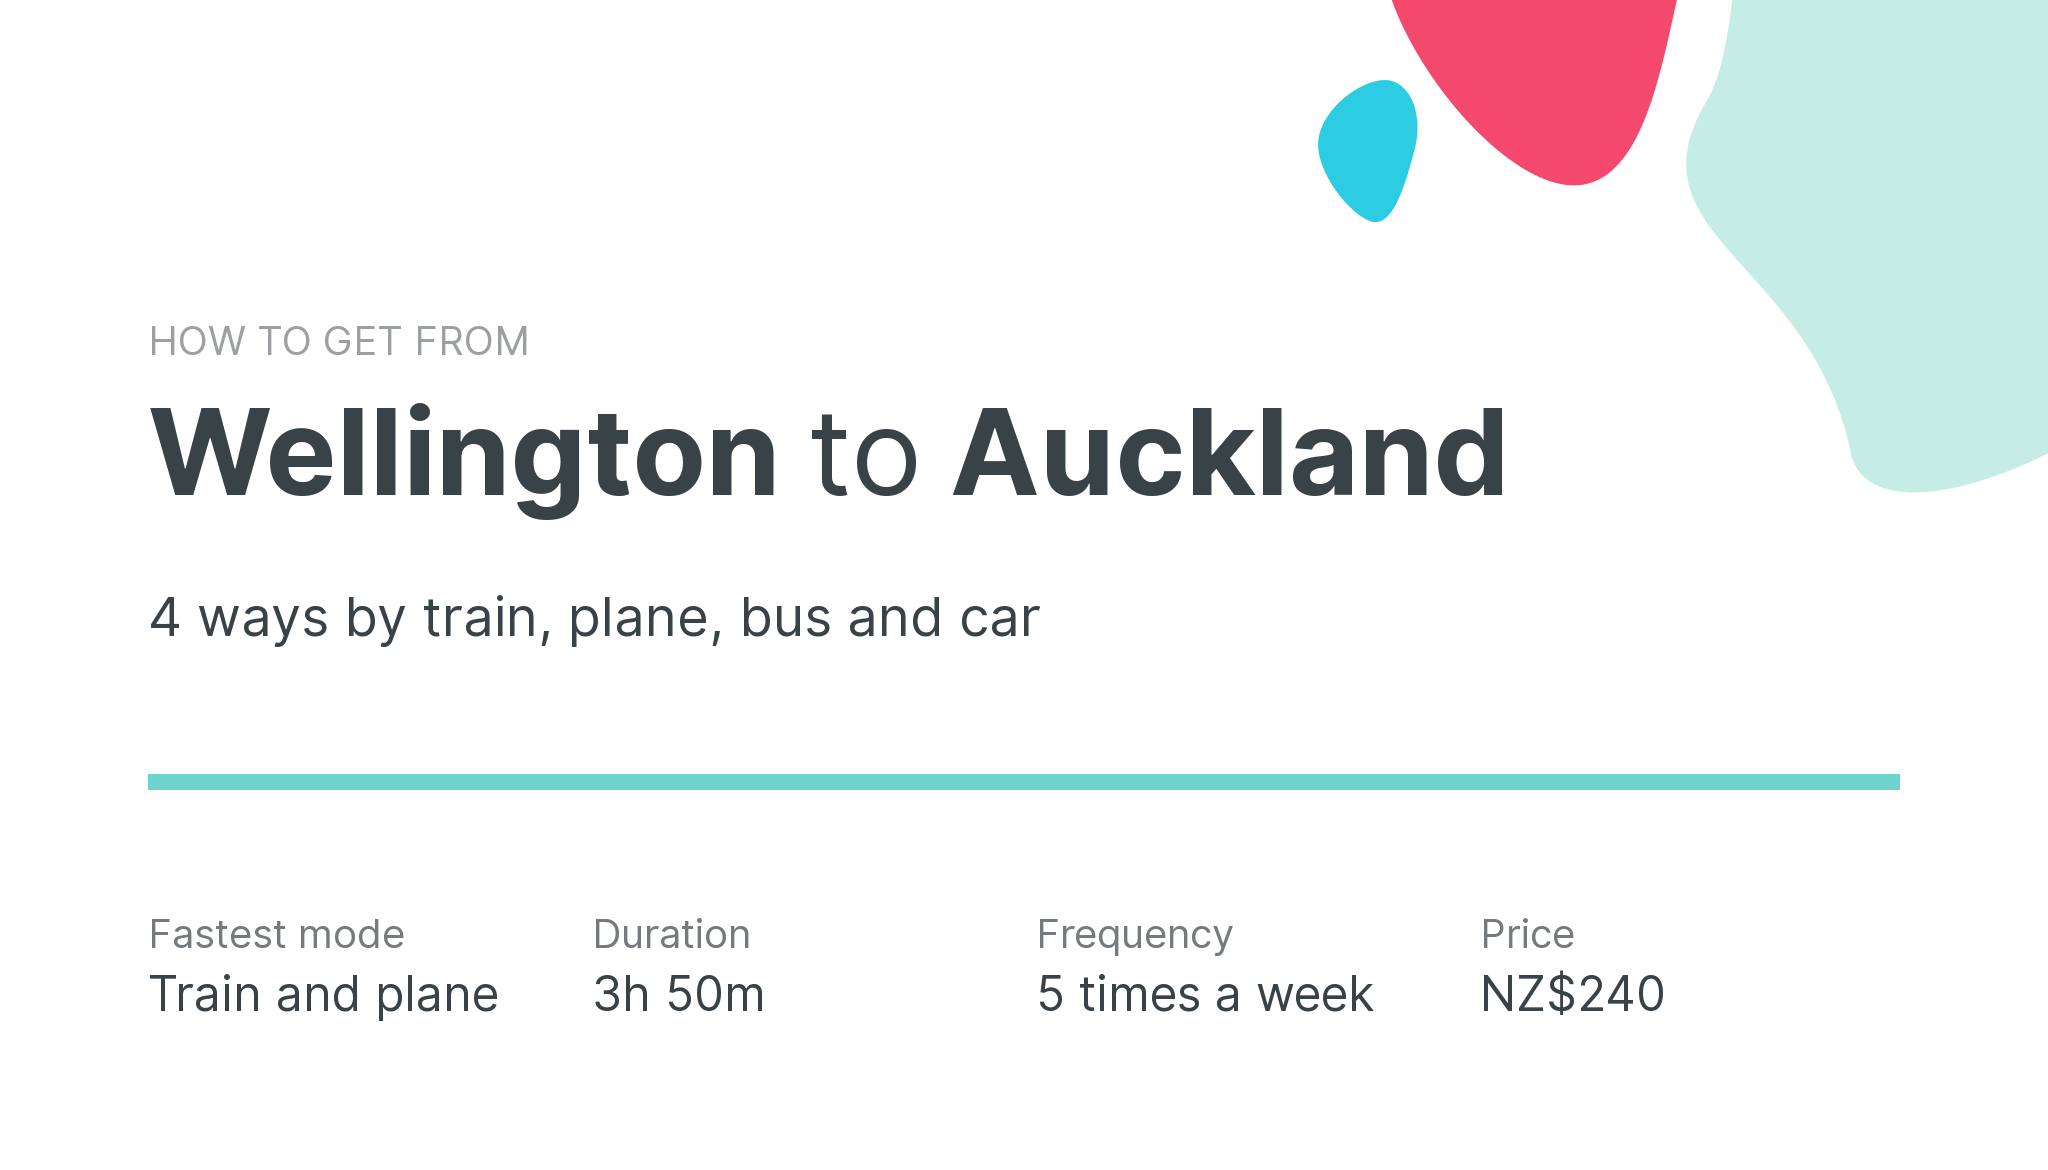 How do I get from Wellington to Auckland